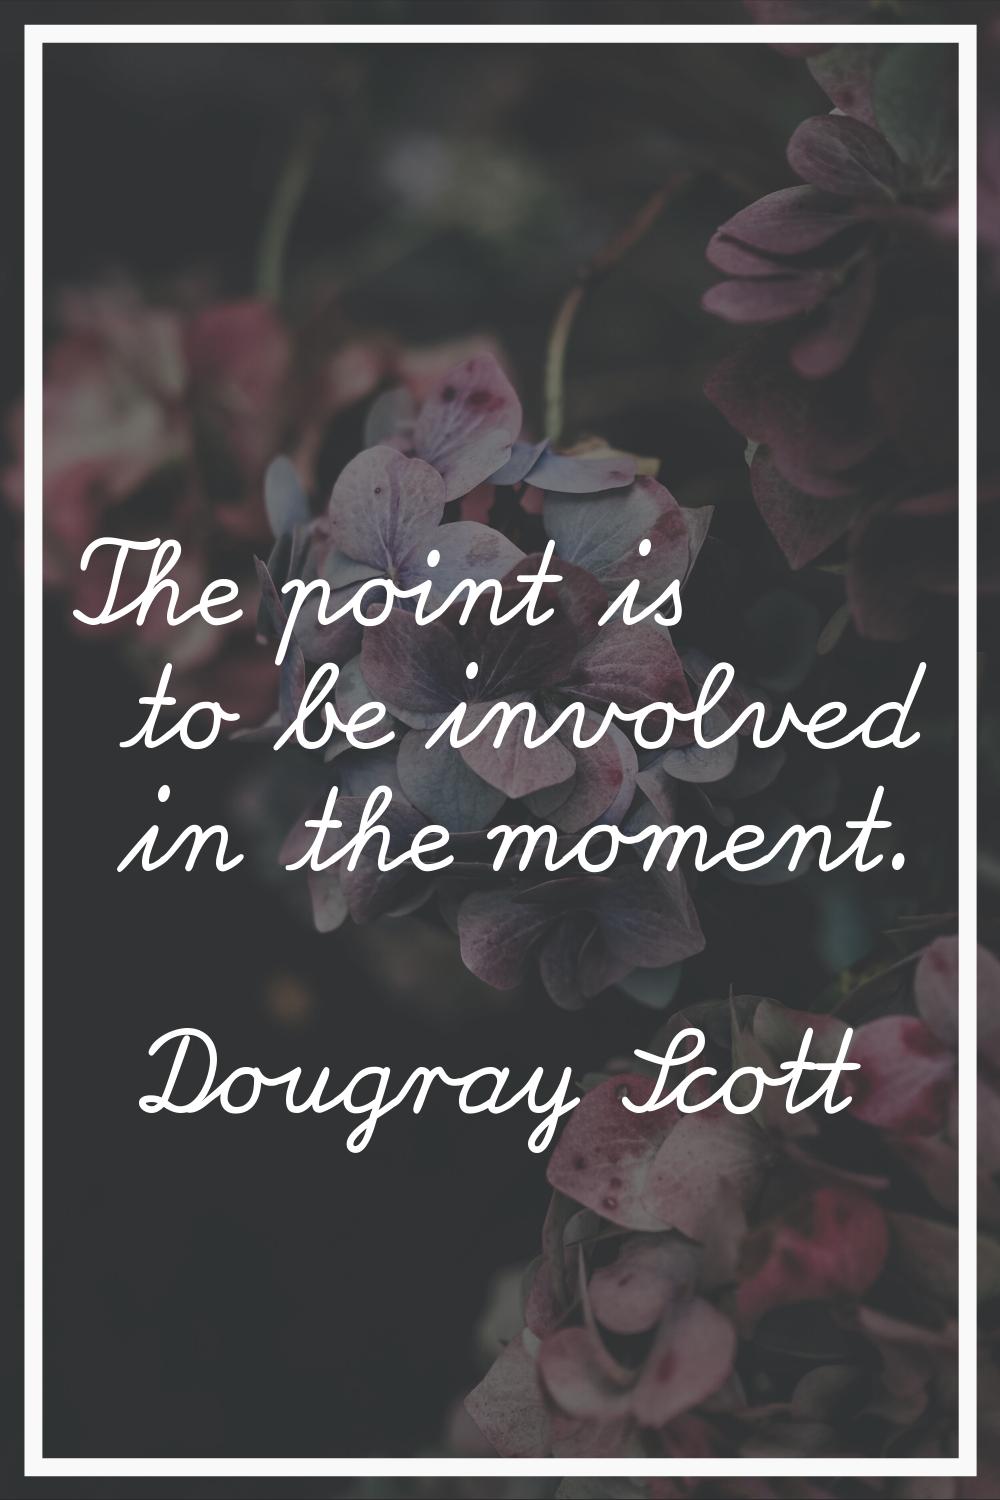 The point is to be involved in the moment.